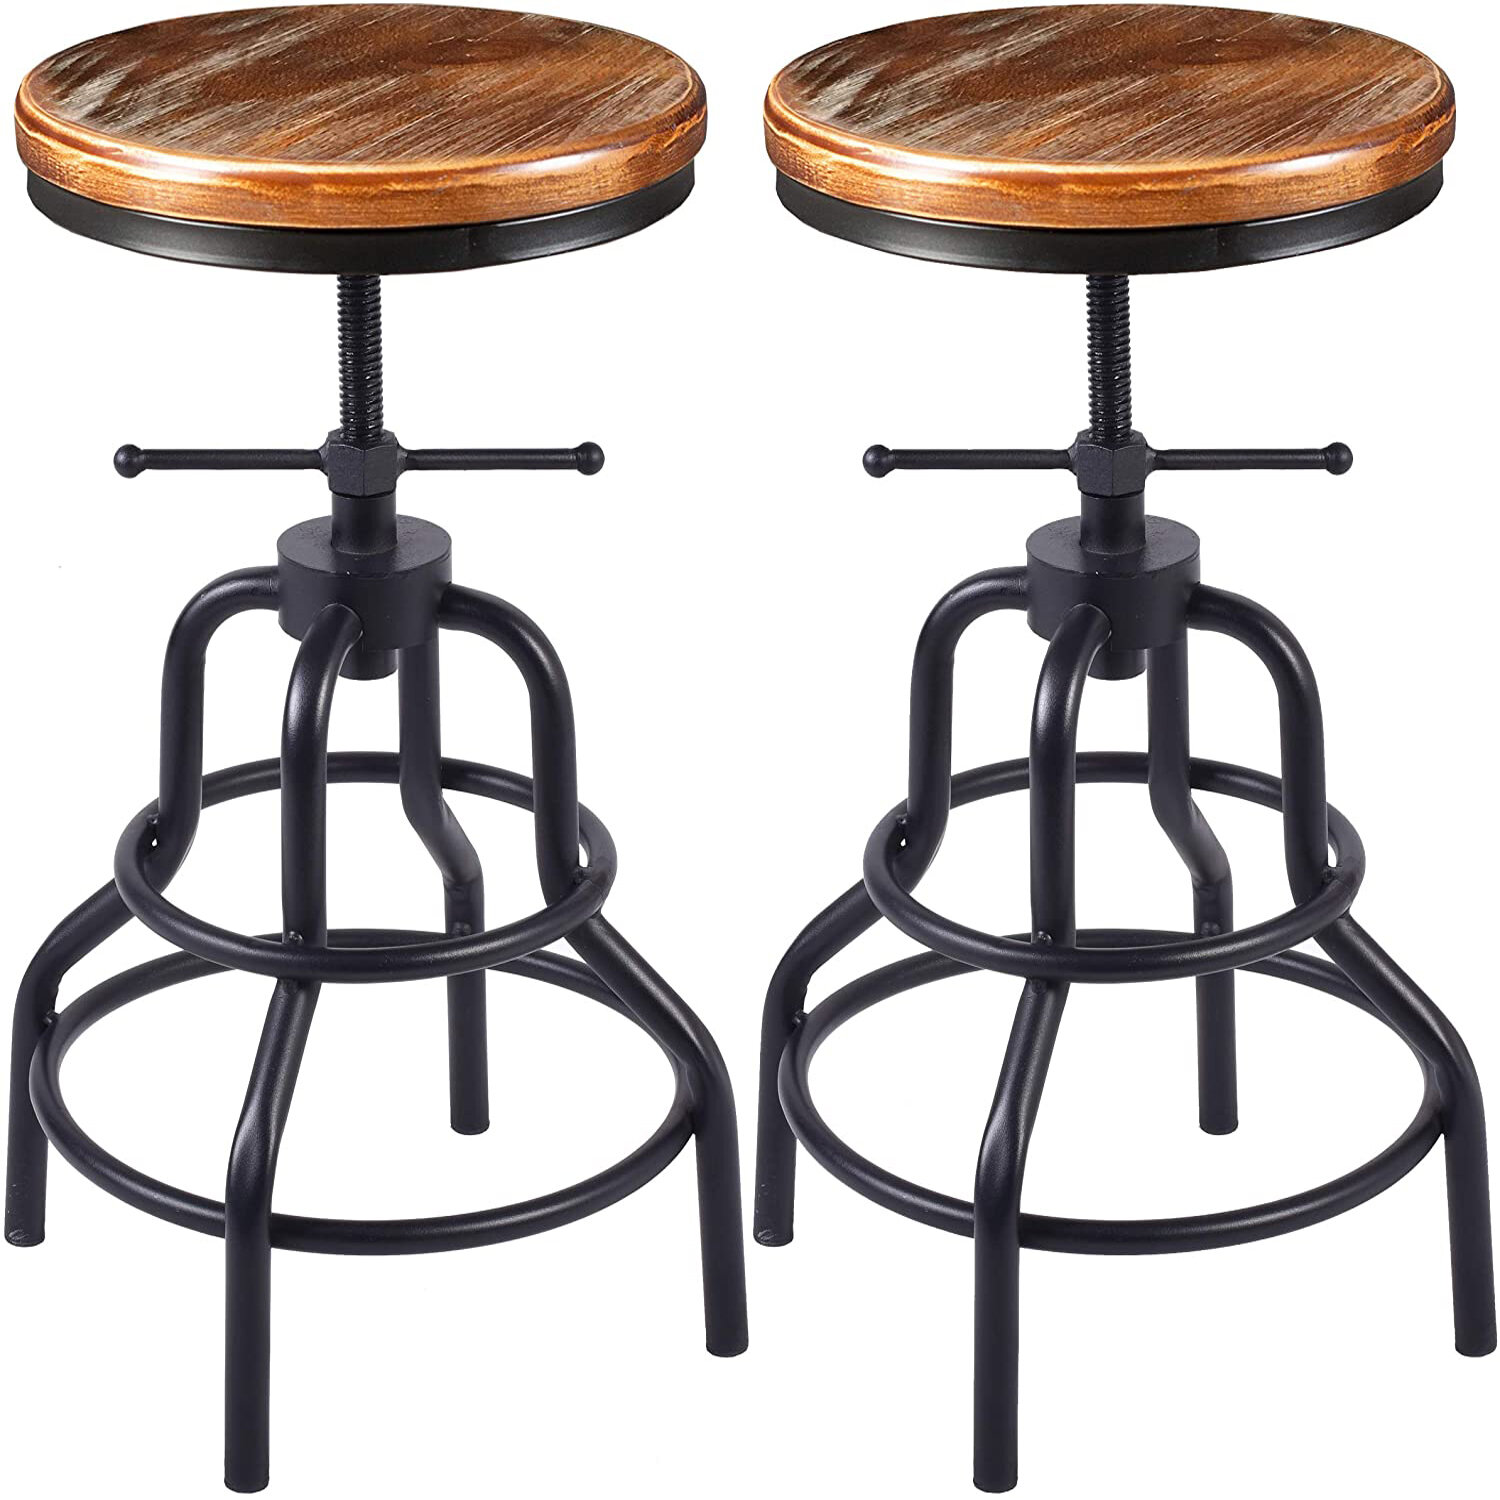 Industrial Bar Stool Antique Swivel Wood Chair Adjustable Height BLACK or TEAL 